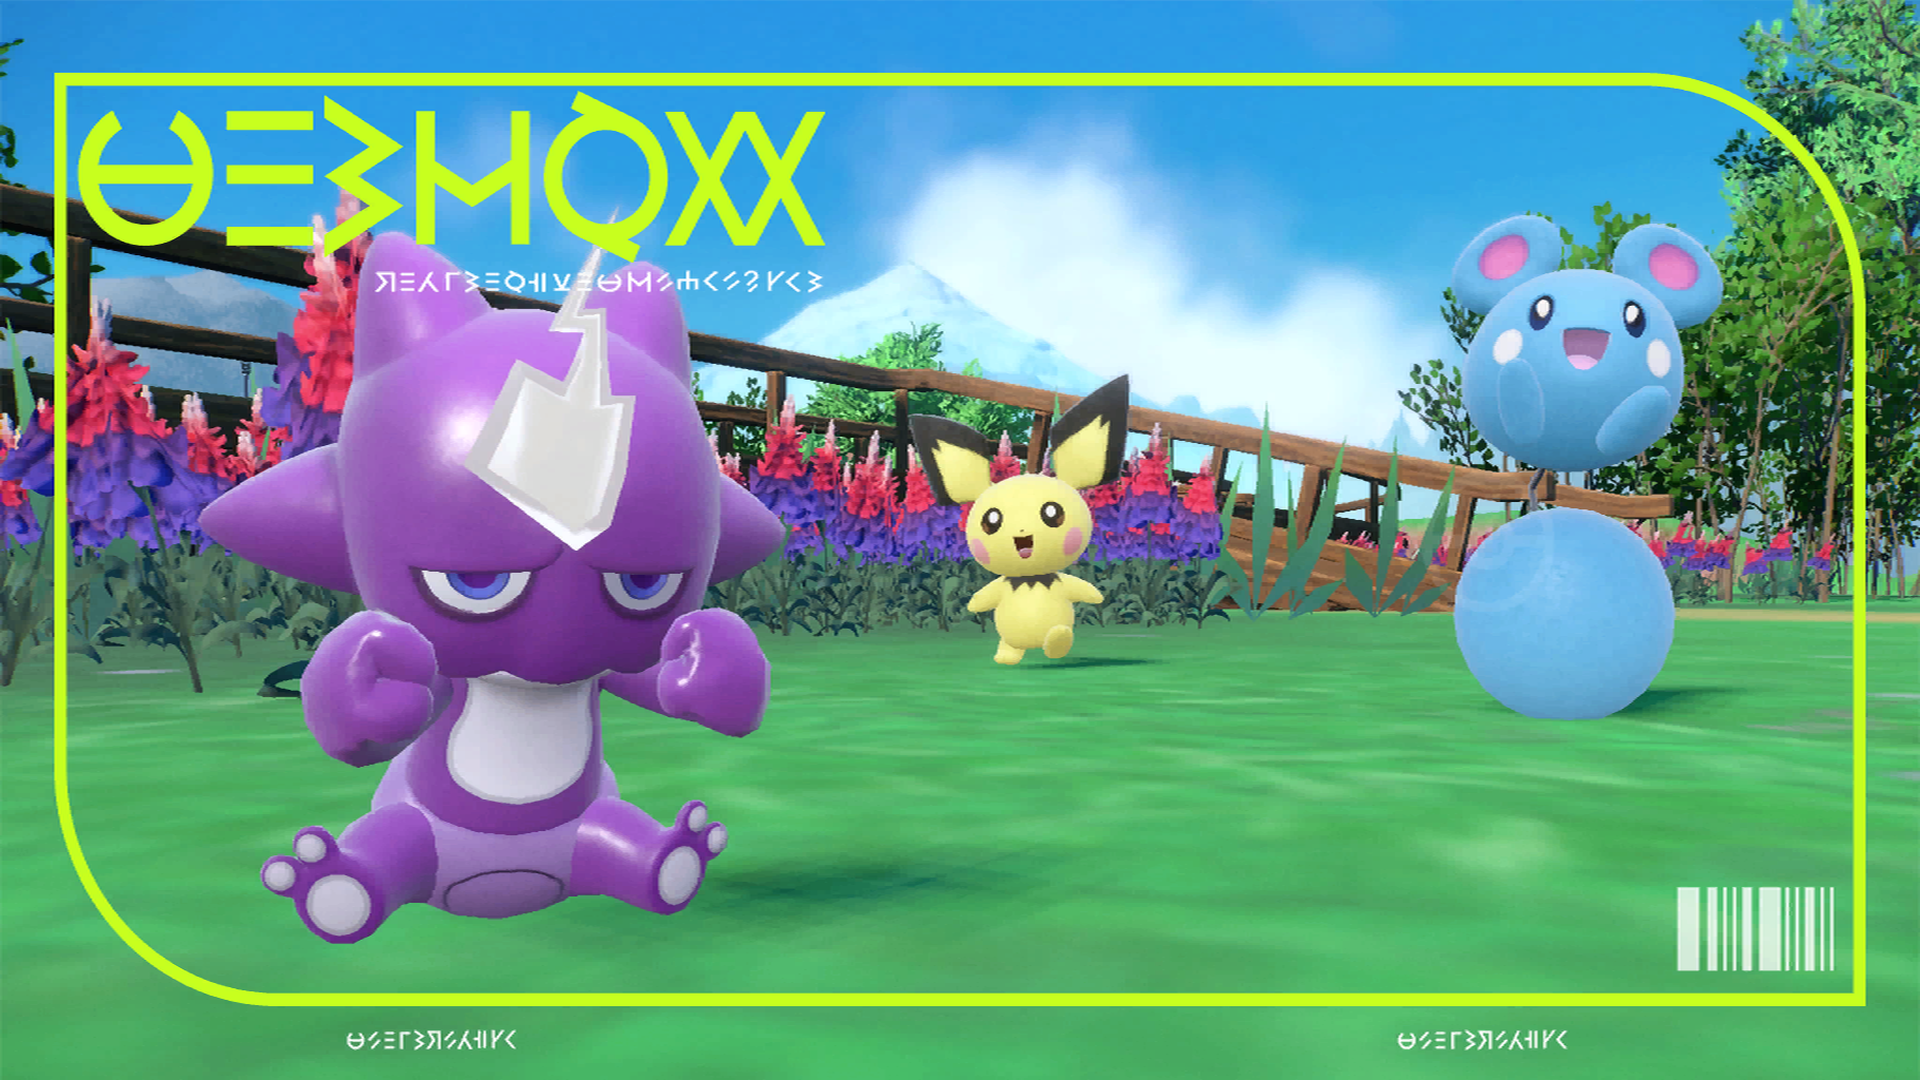 How to get Toxel & Toxtricity in Pokemon Scarlet Violet: Amped & Low Key  forms and natures - Dexerto